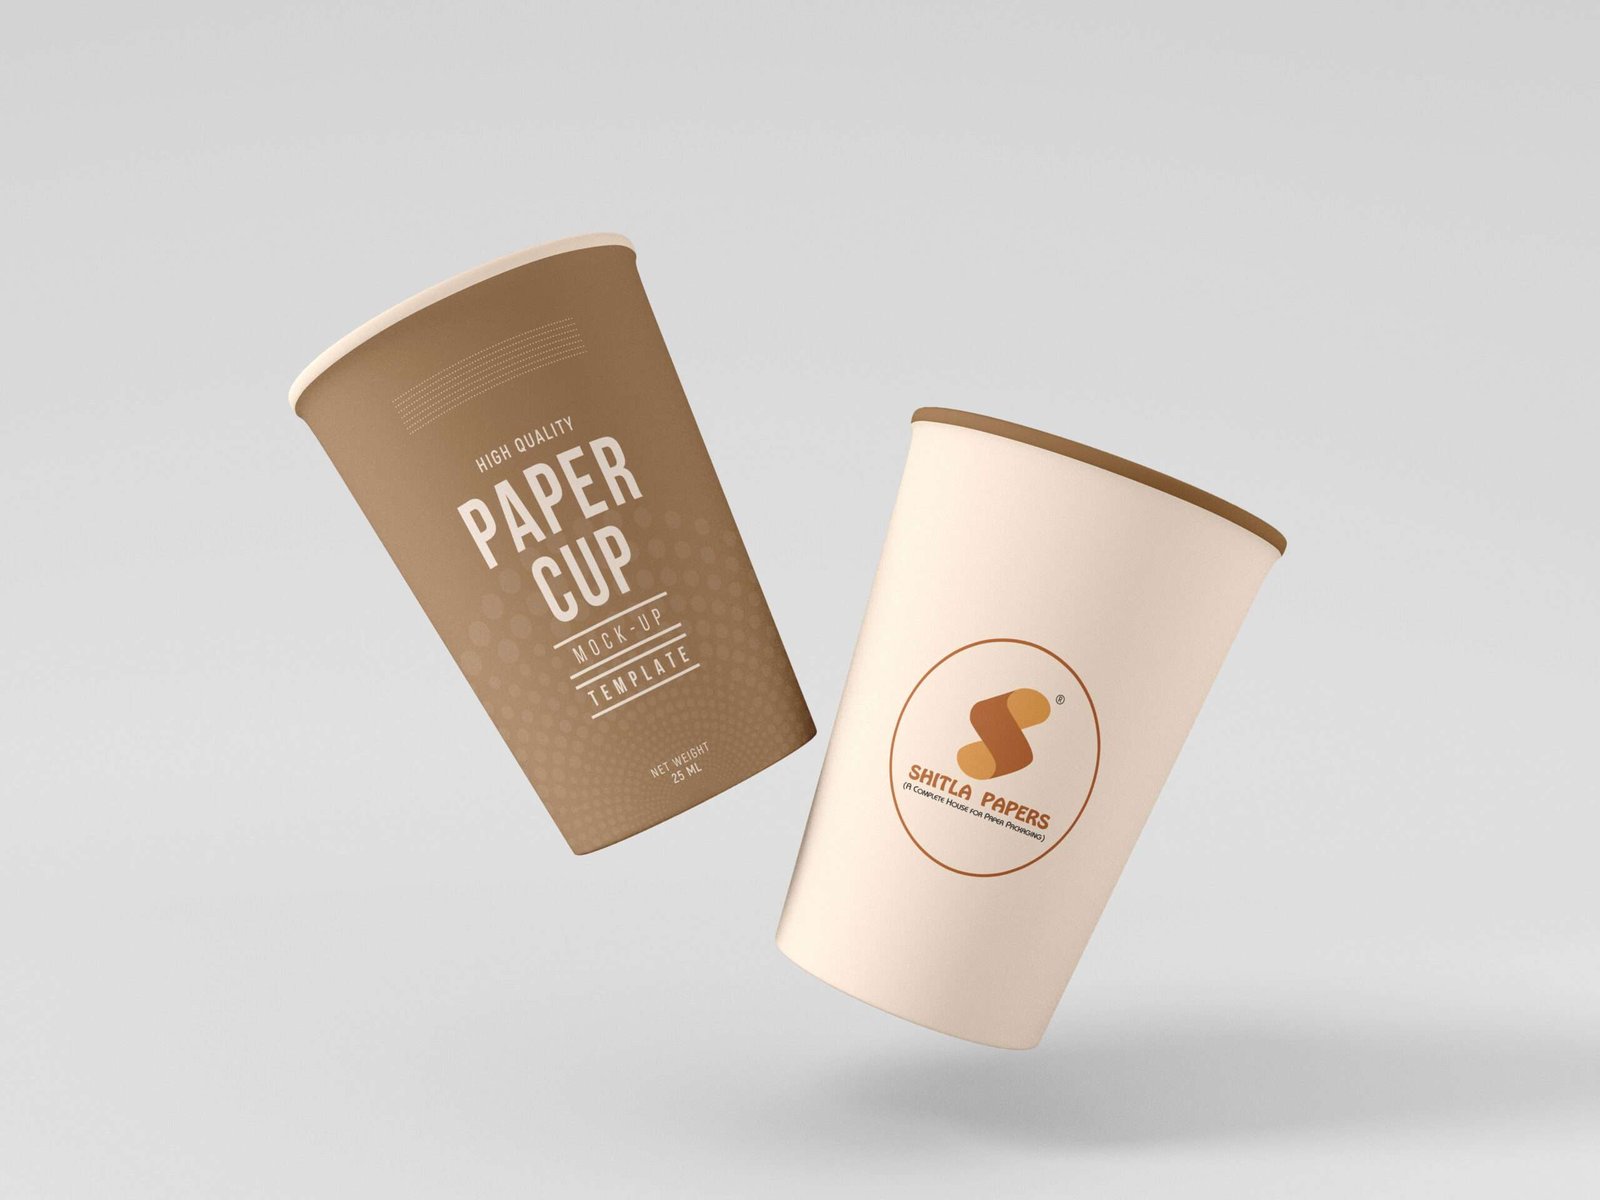 shitla papers cup boards